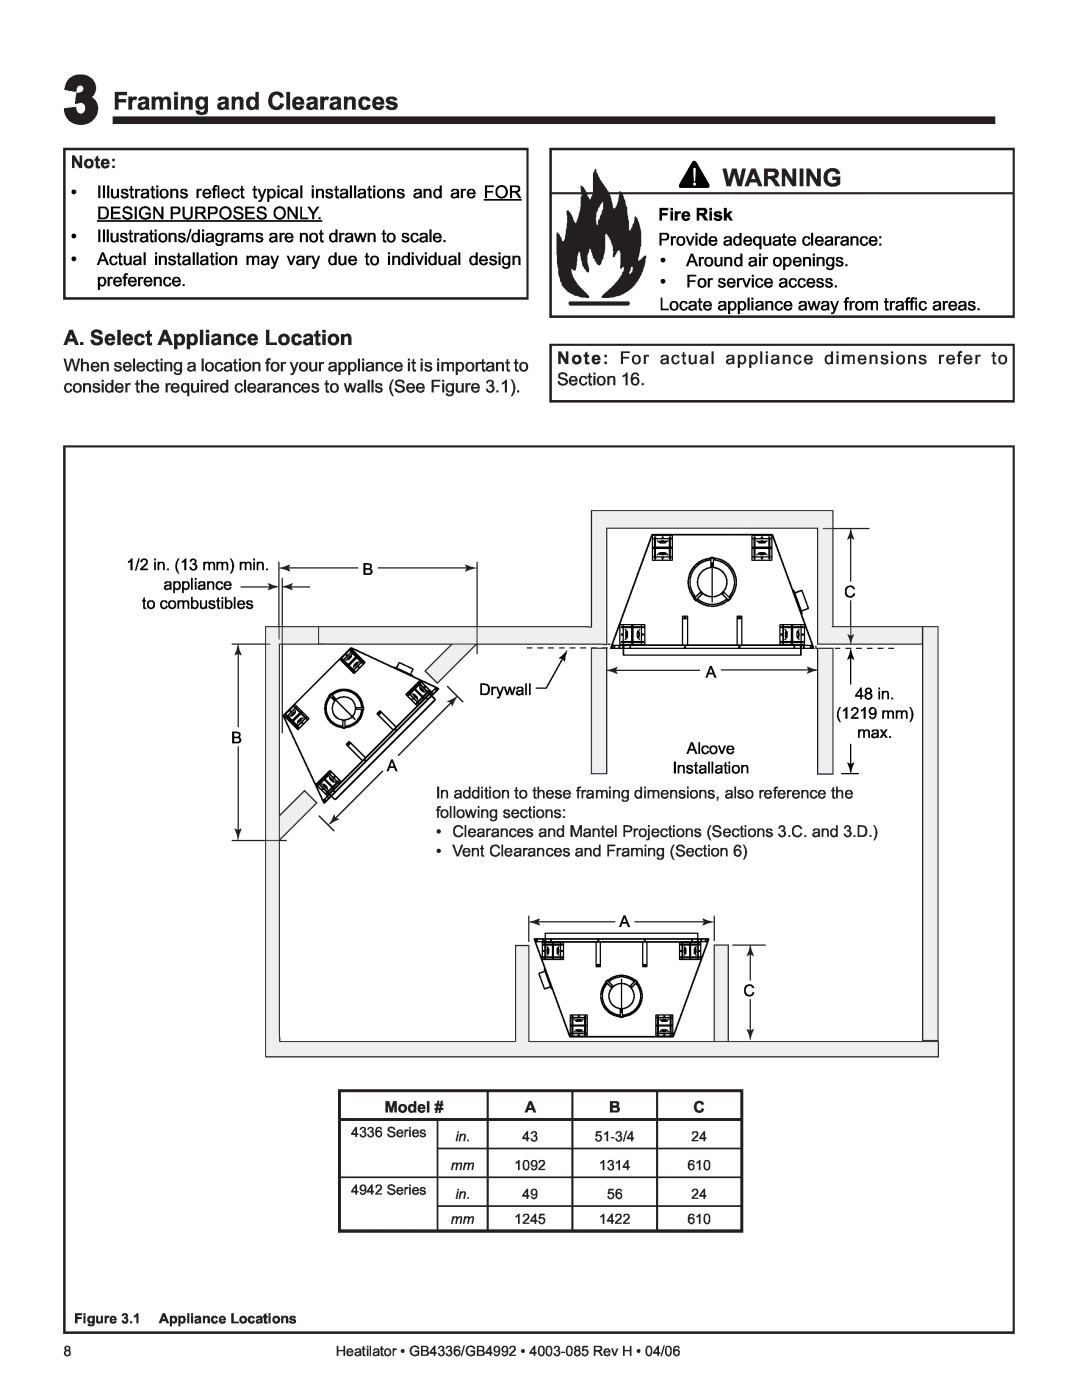 Heatiator GB4336 owner manual 3Framing and Clearances, A. Select Appliance Location, Fire Risk 